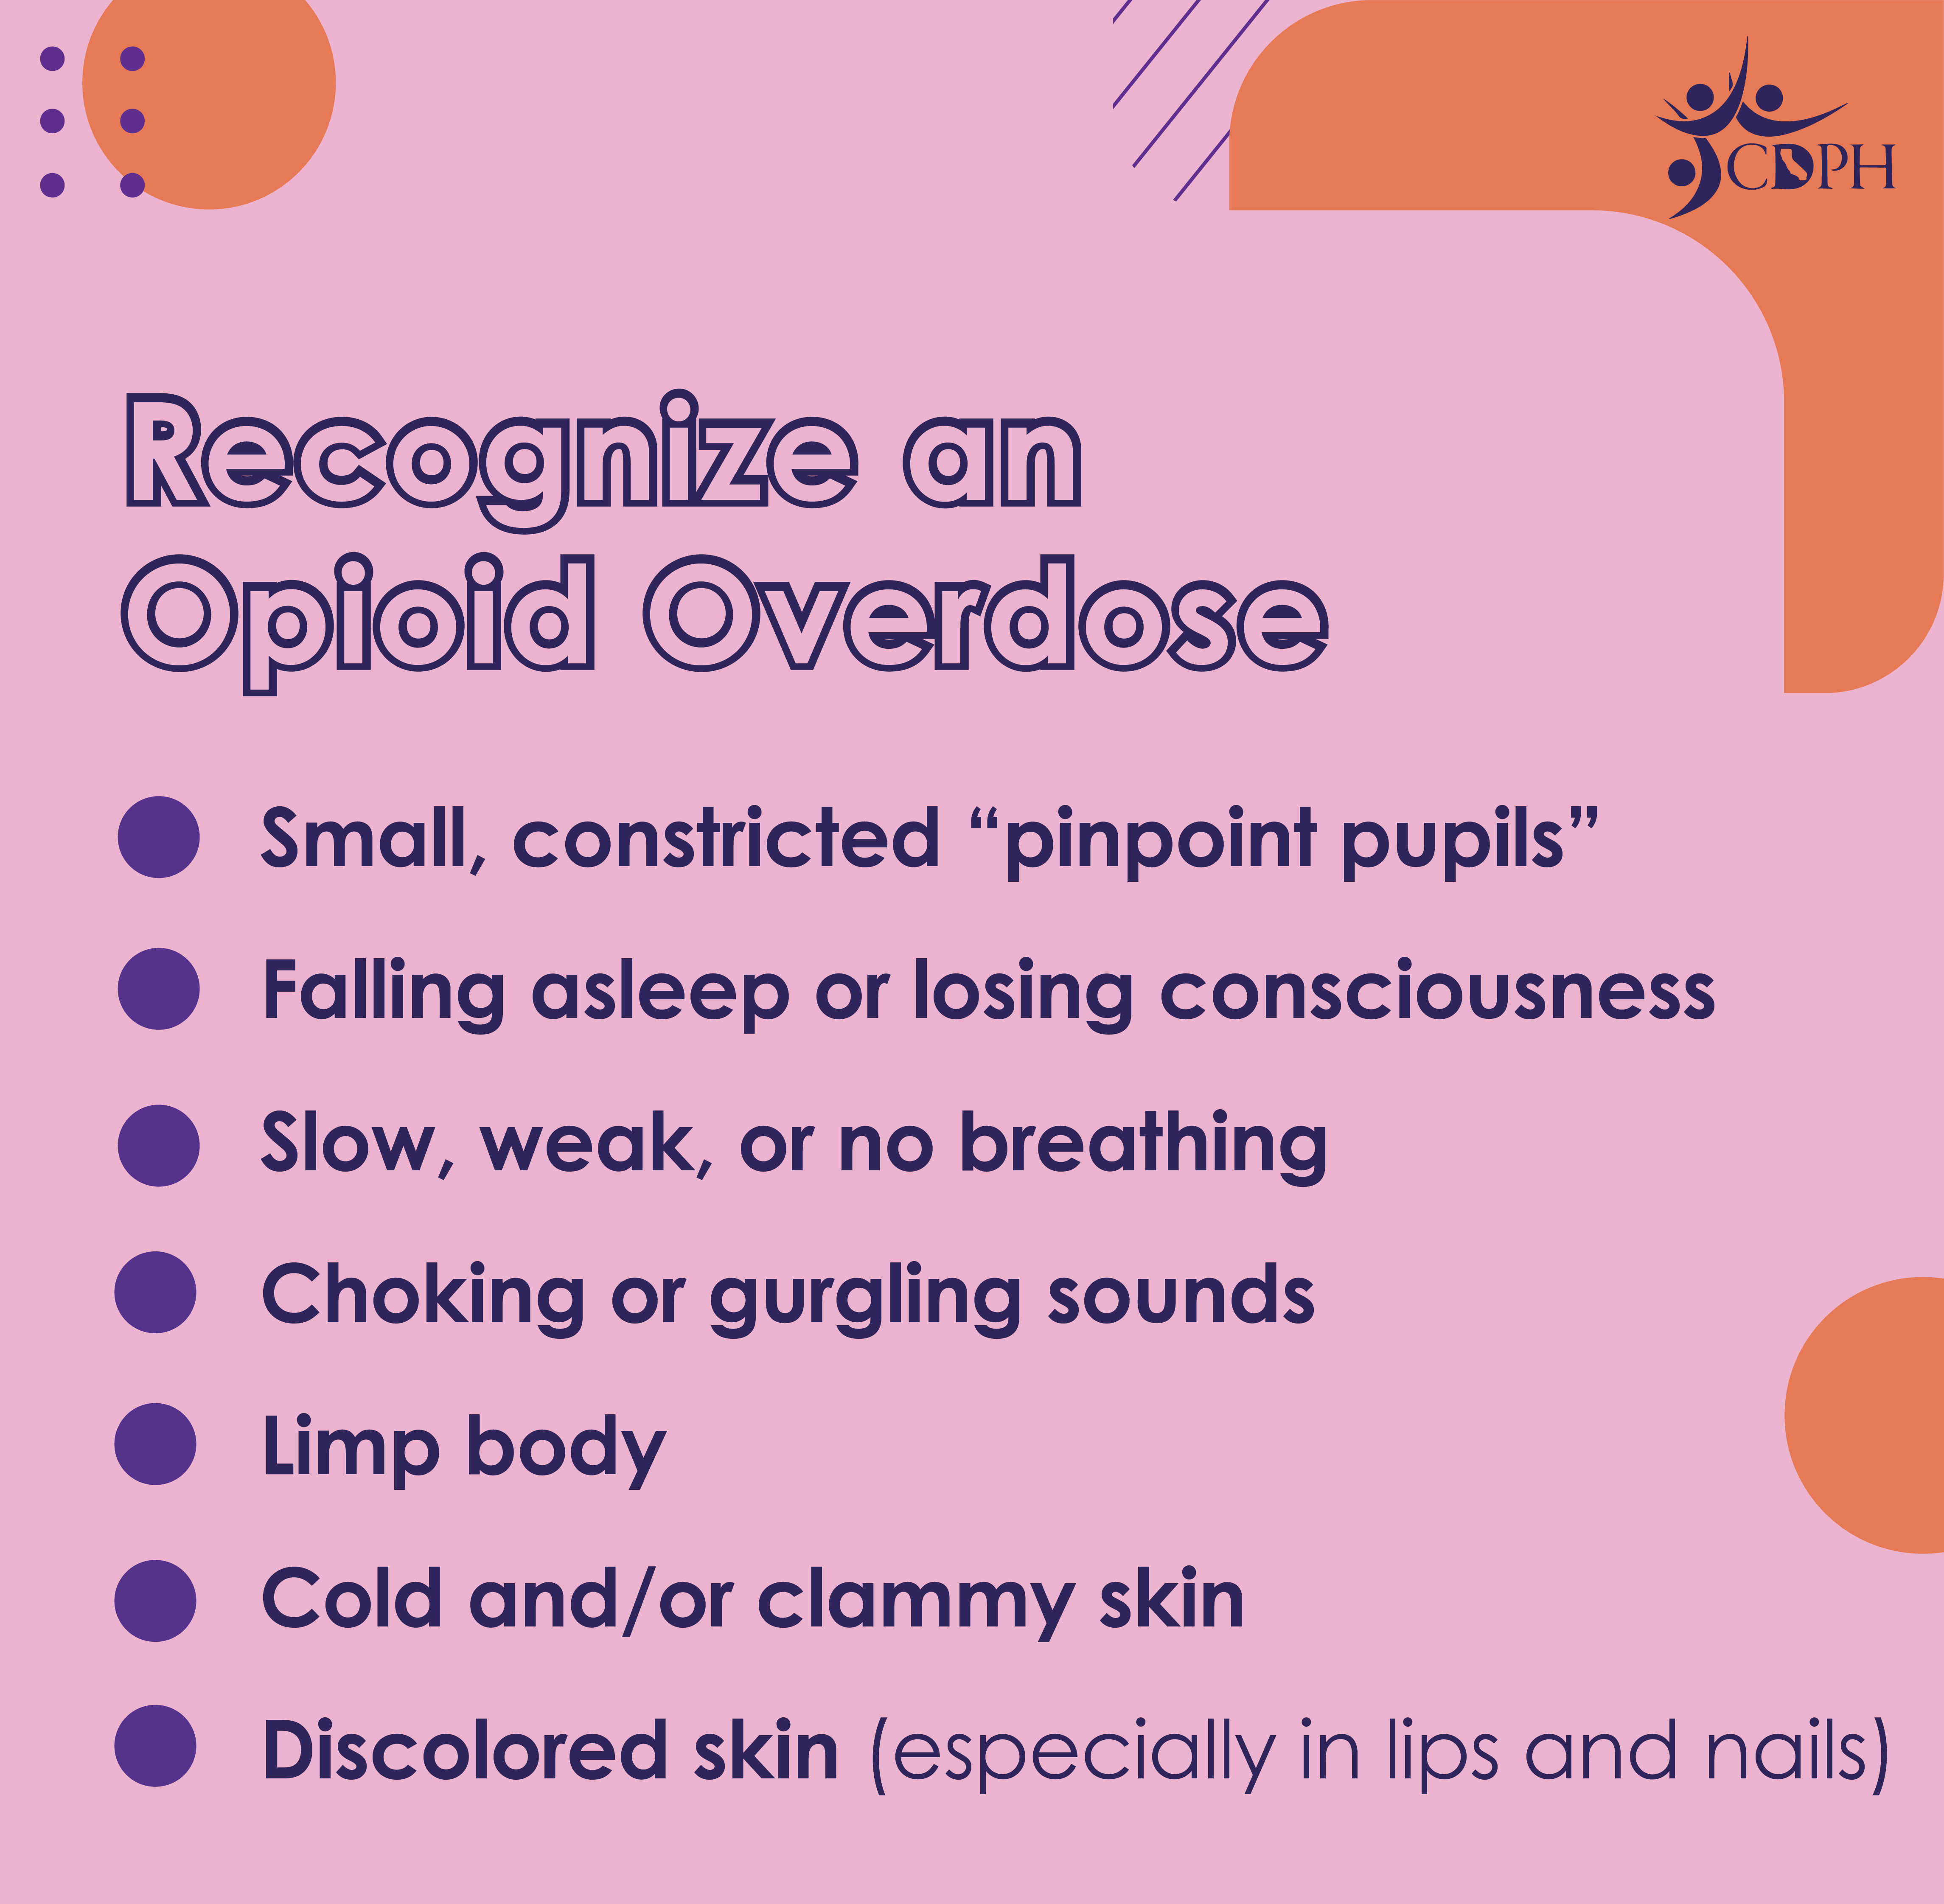 Recognize an opioid overdose